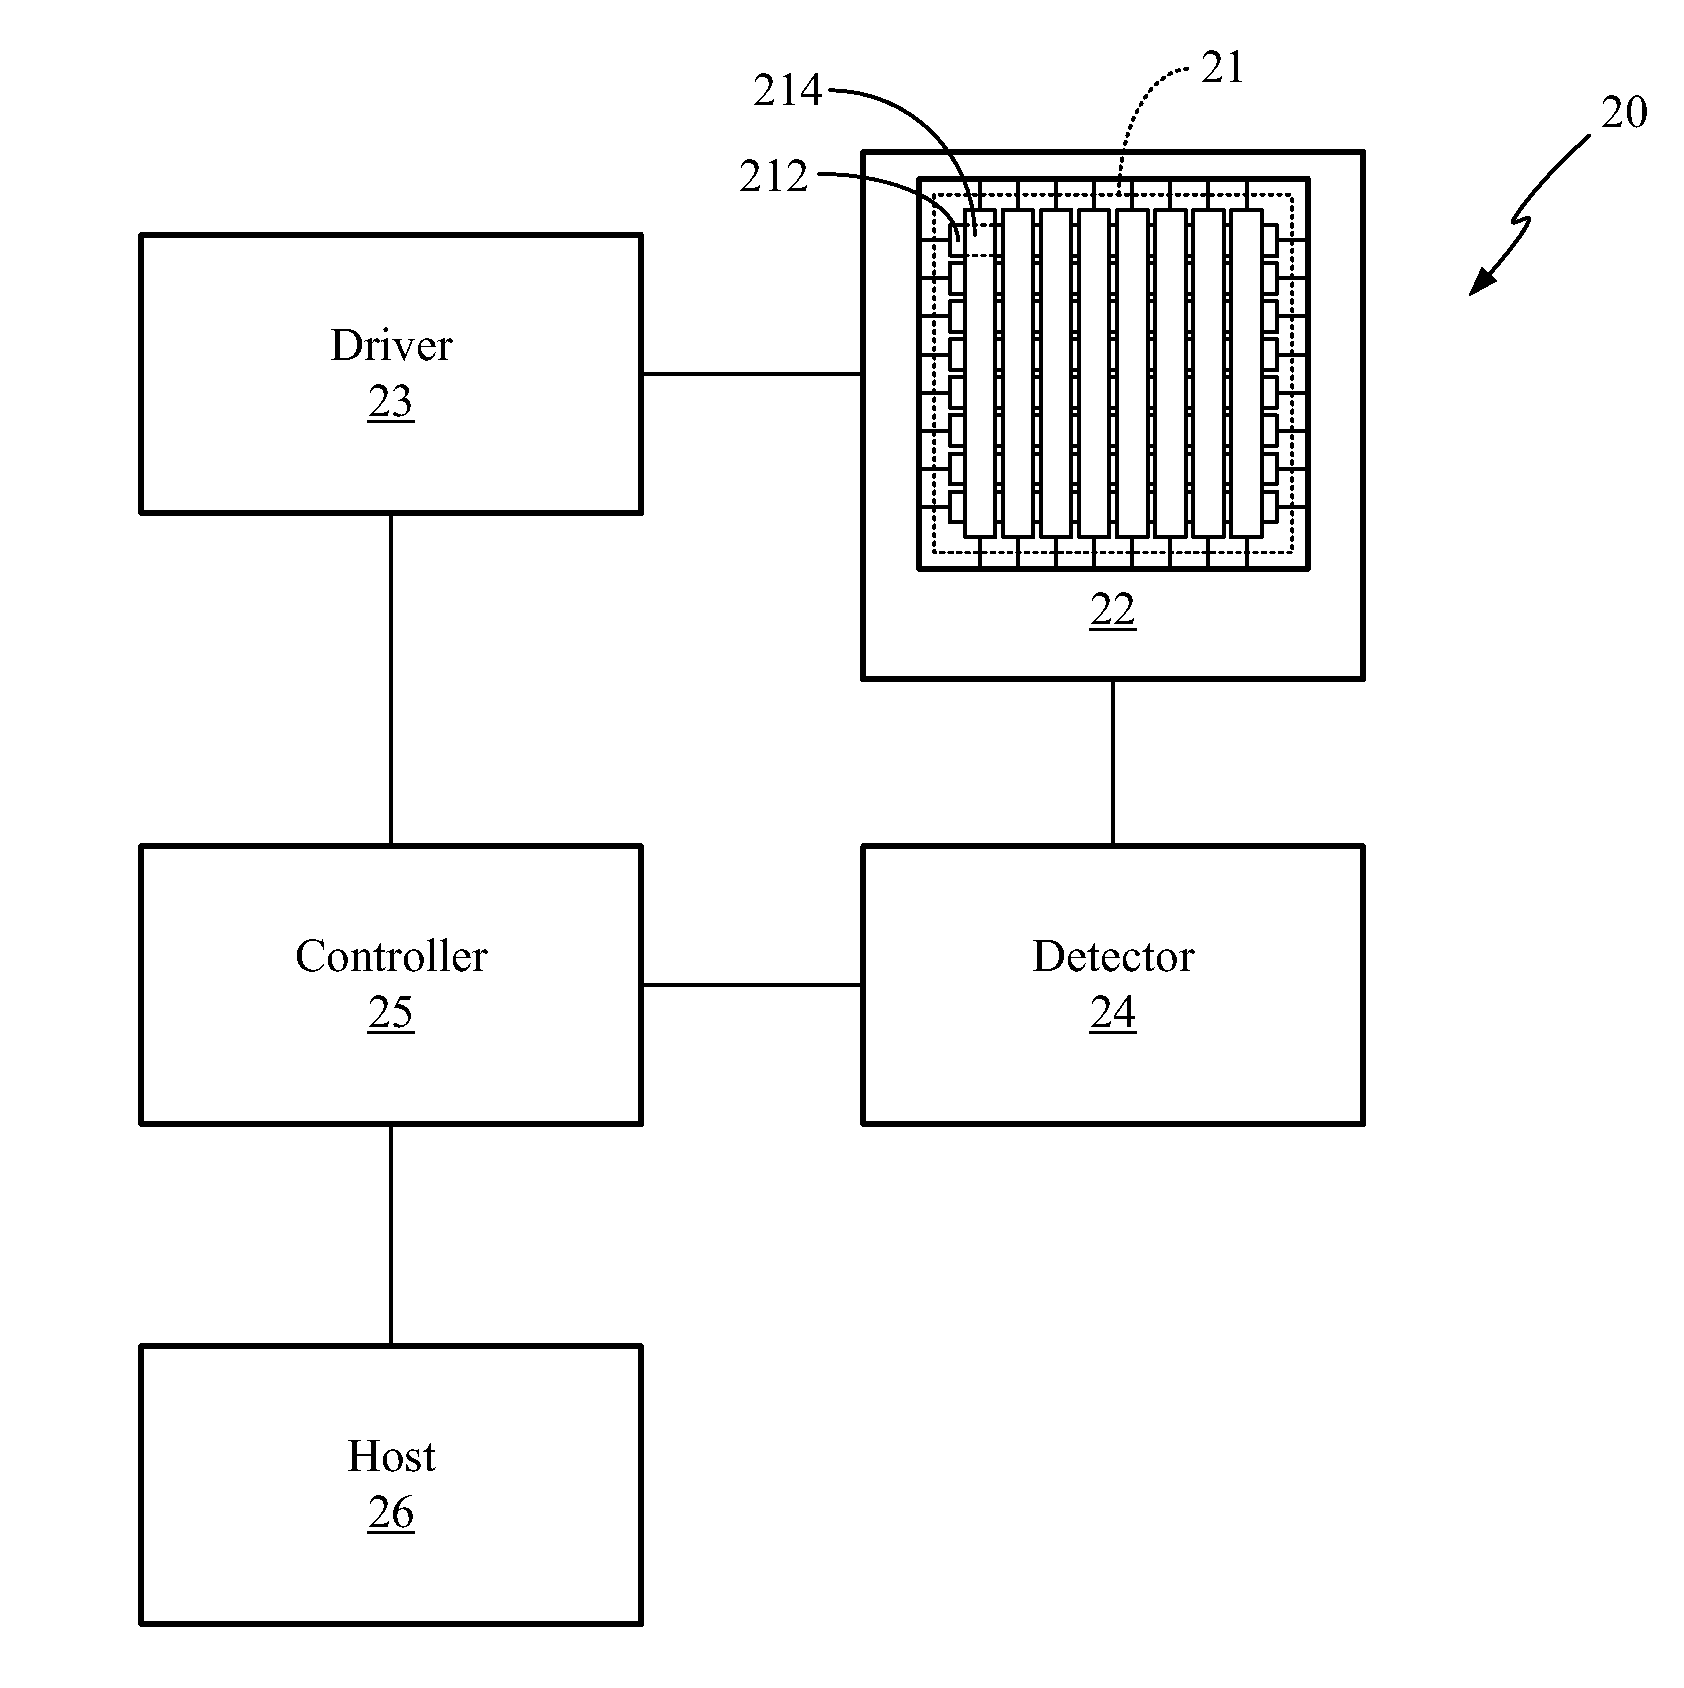 Method and Device for Position Detection with Palm Rejection